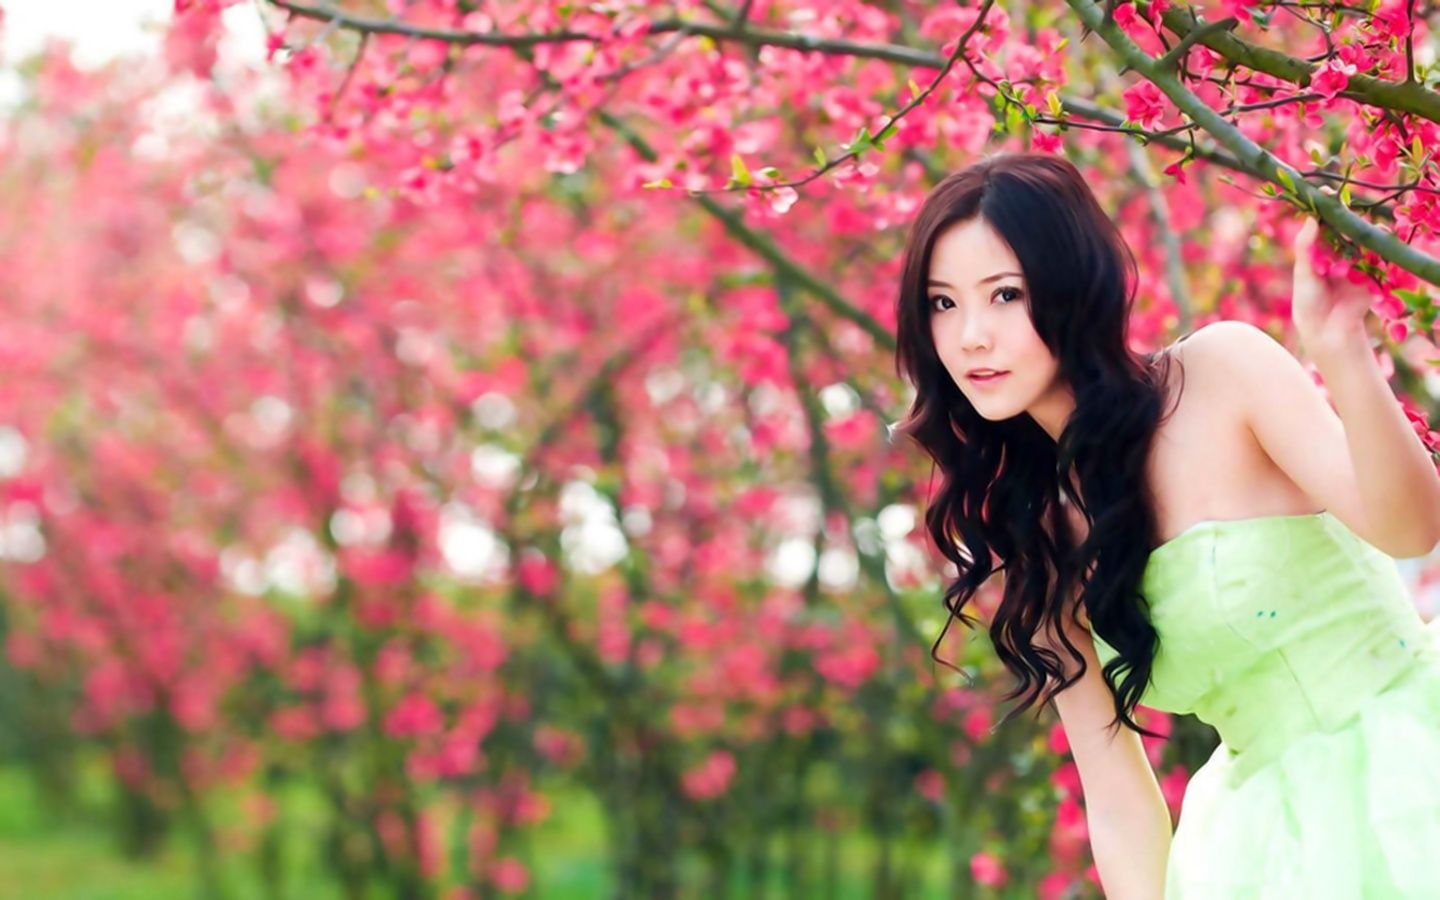 A Full Eye of Red Flowers, Yet the Girl in Green Dress is Still More Attractive, She is a Natural Beauty